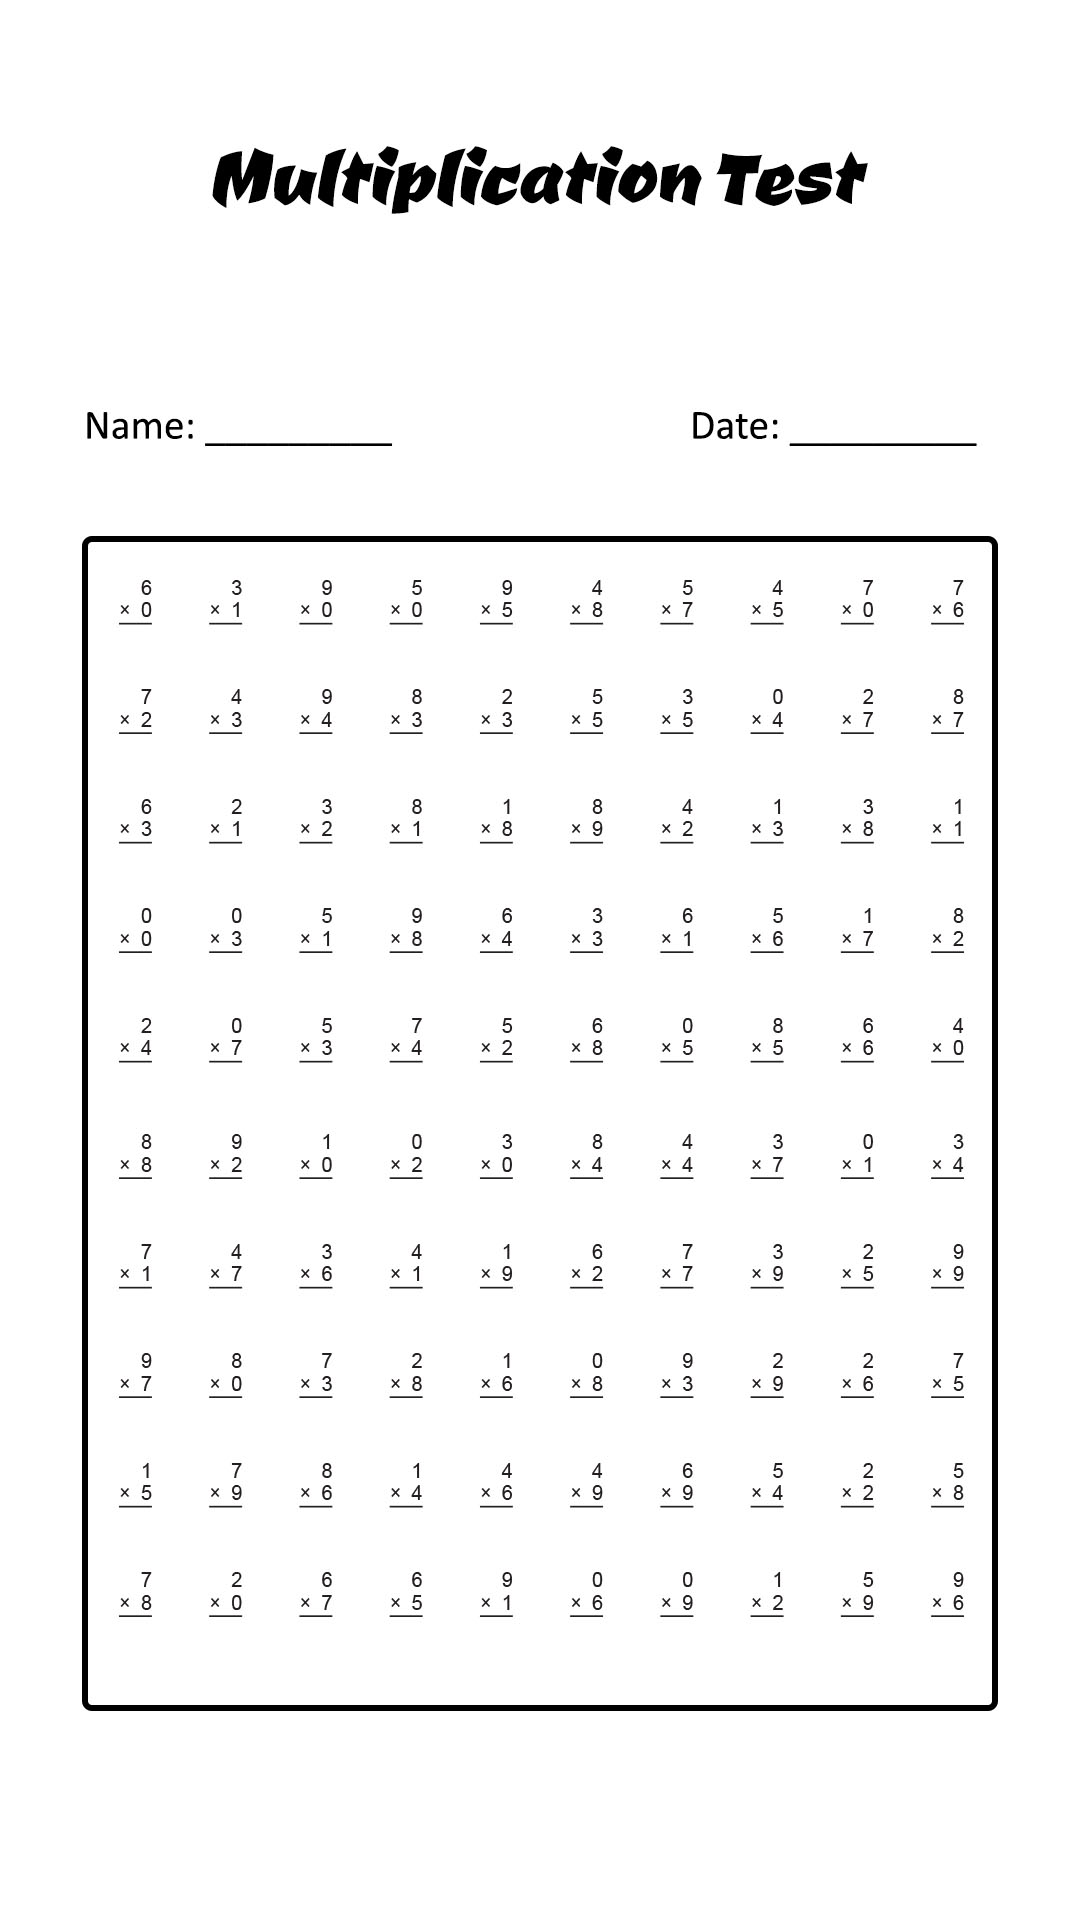 free-printable-multiplication-facts-web-my-collection-of-free-multiplication-facts-worksheets